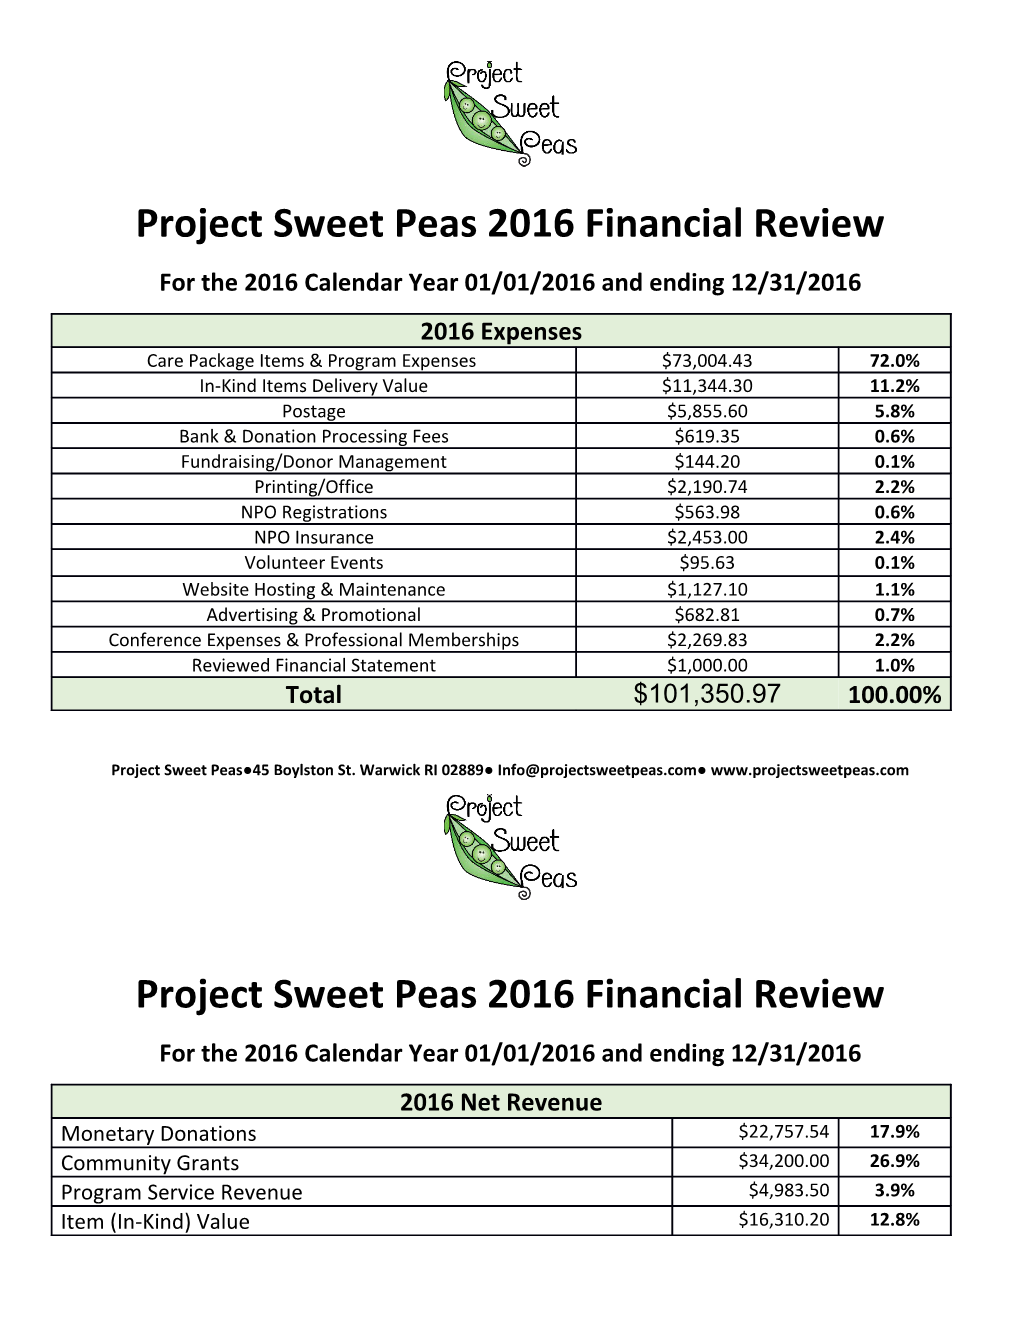 Project Sweet Peas 2016 Financial Review